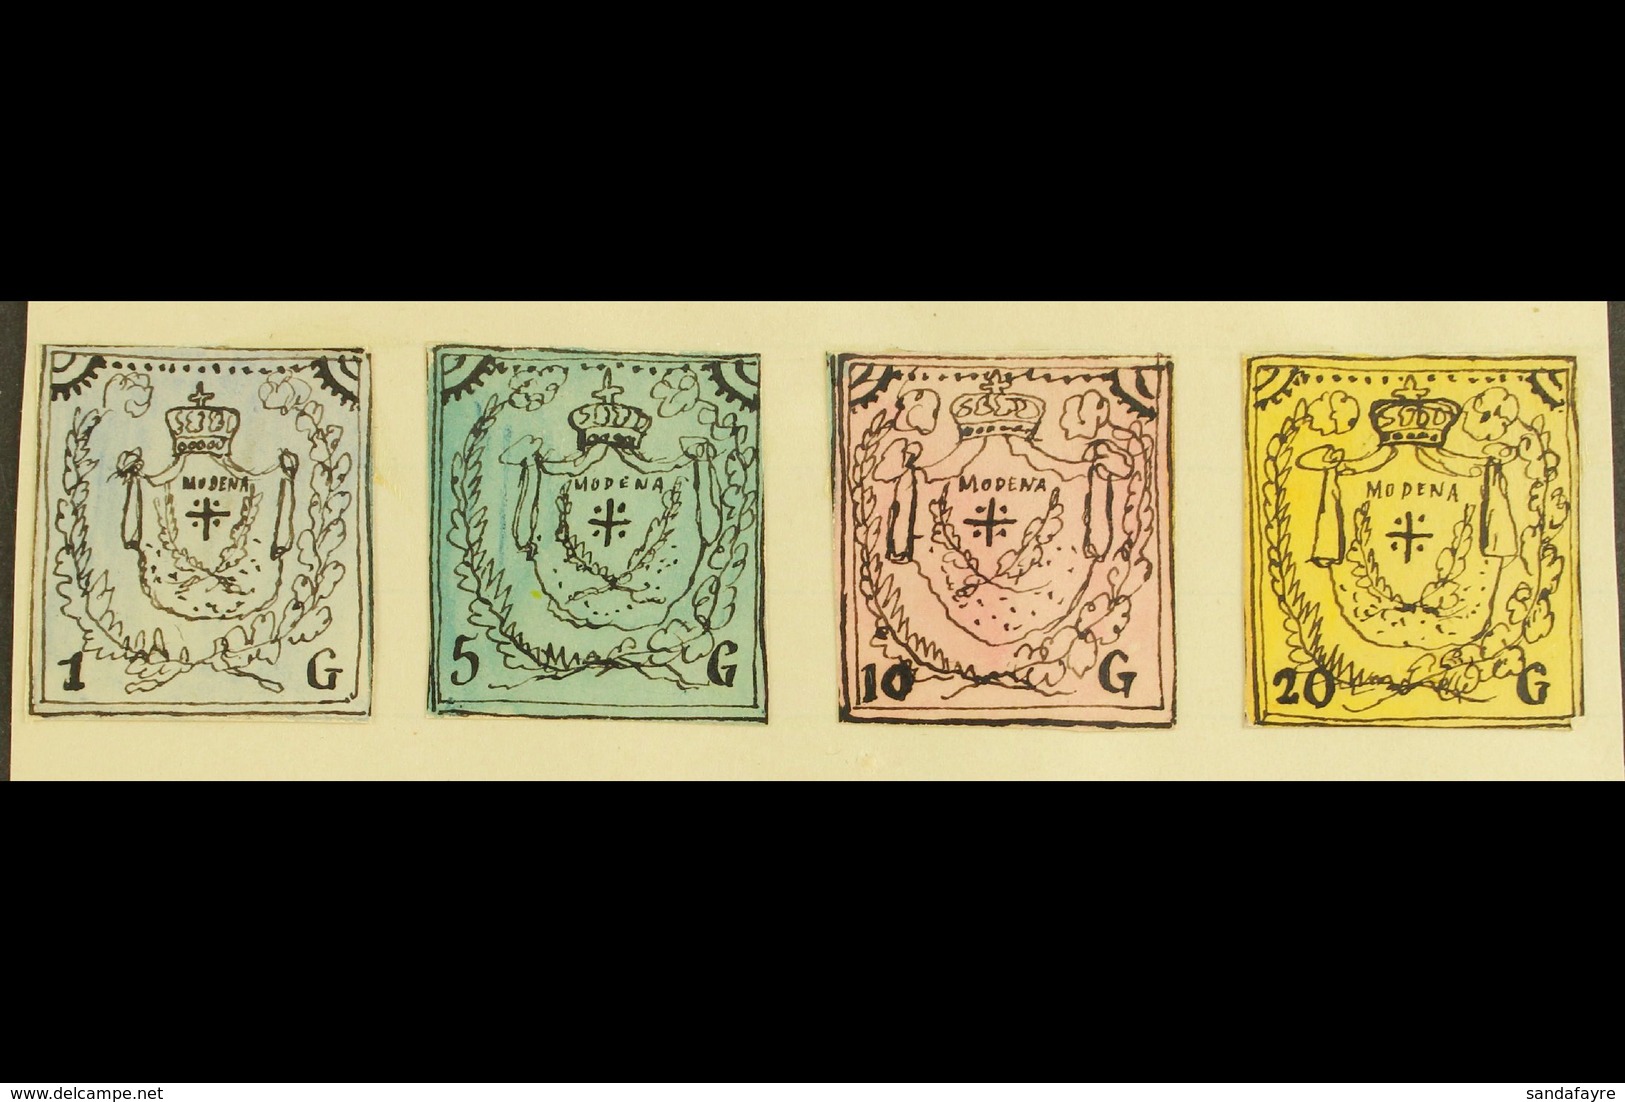 1861 HAND PAINTED STAMPS Unique Miniature Artworks Created By A French "Timbrophile" In 1861. MODENA Four Values Only Va - Zonder Classificatie